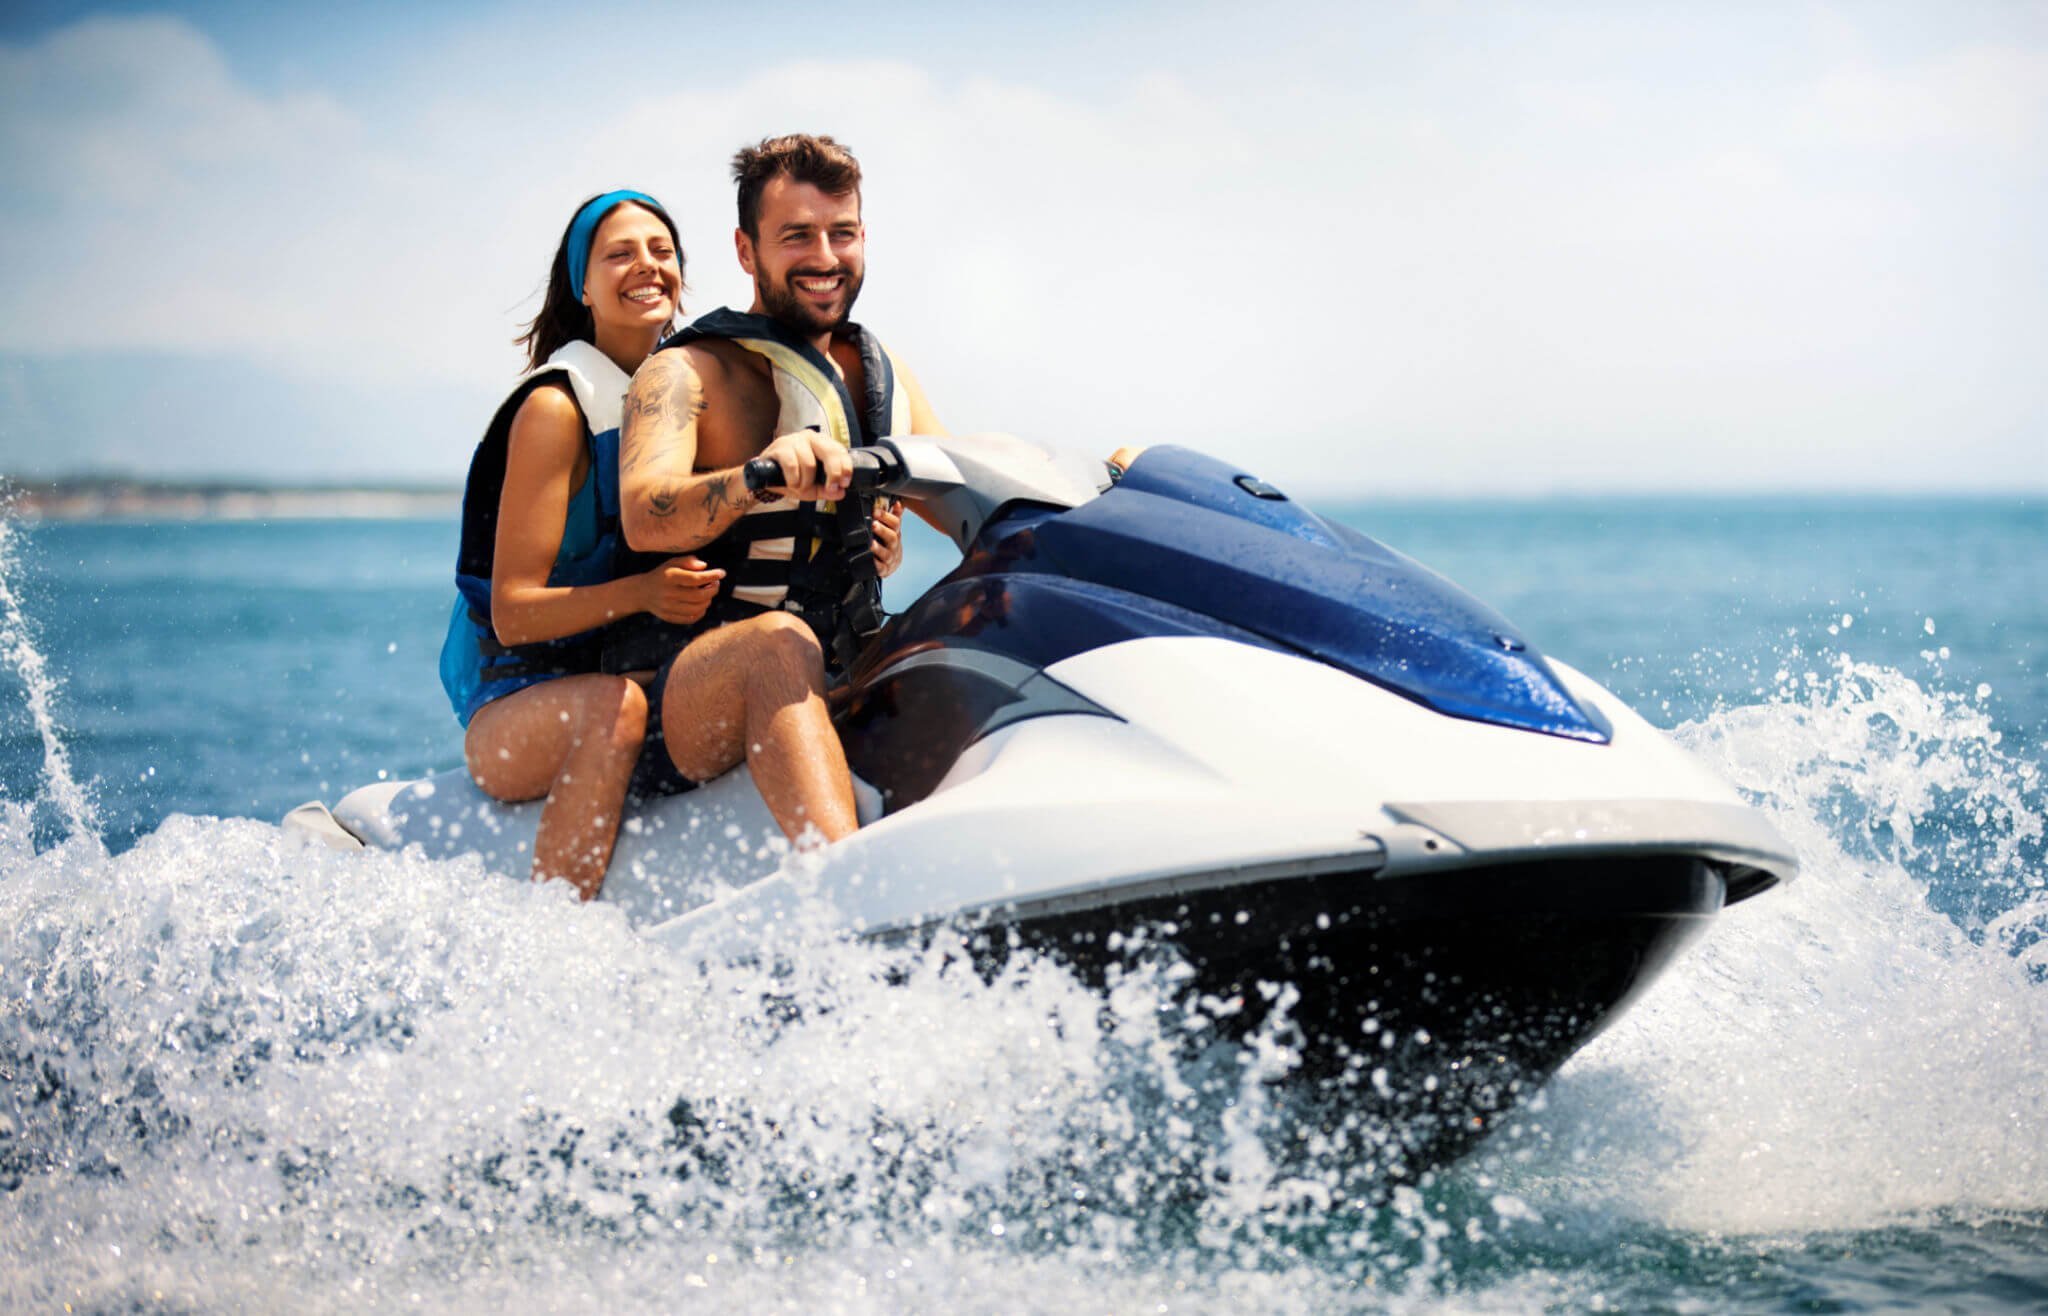 Rent Jet ski Valencia ✓ Water activity for groups